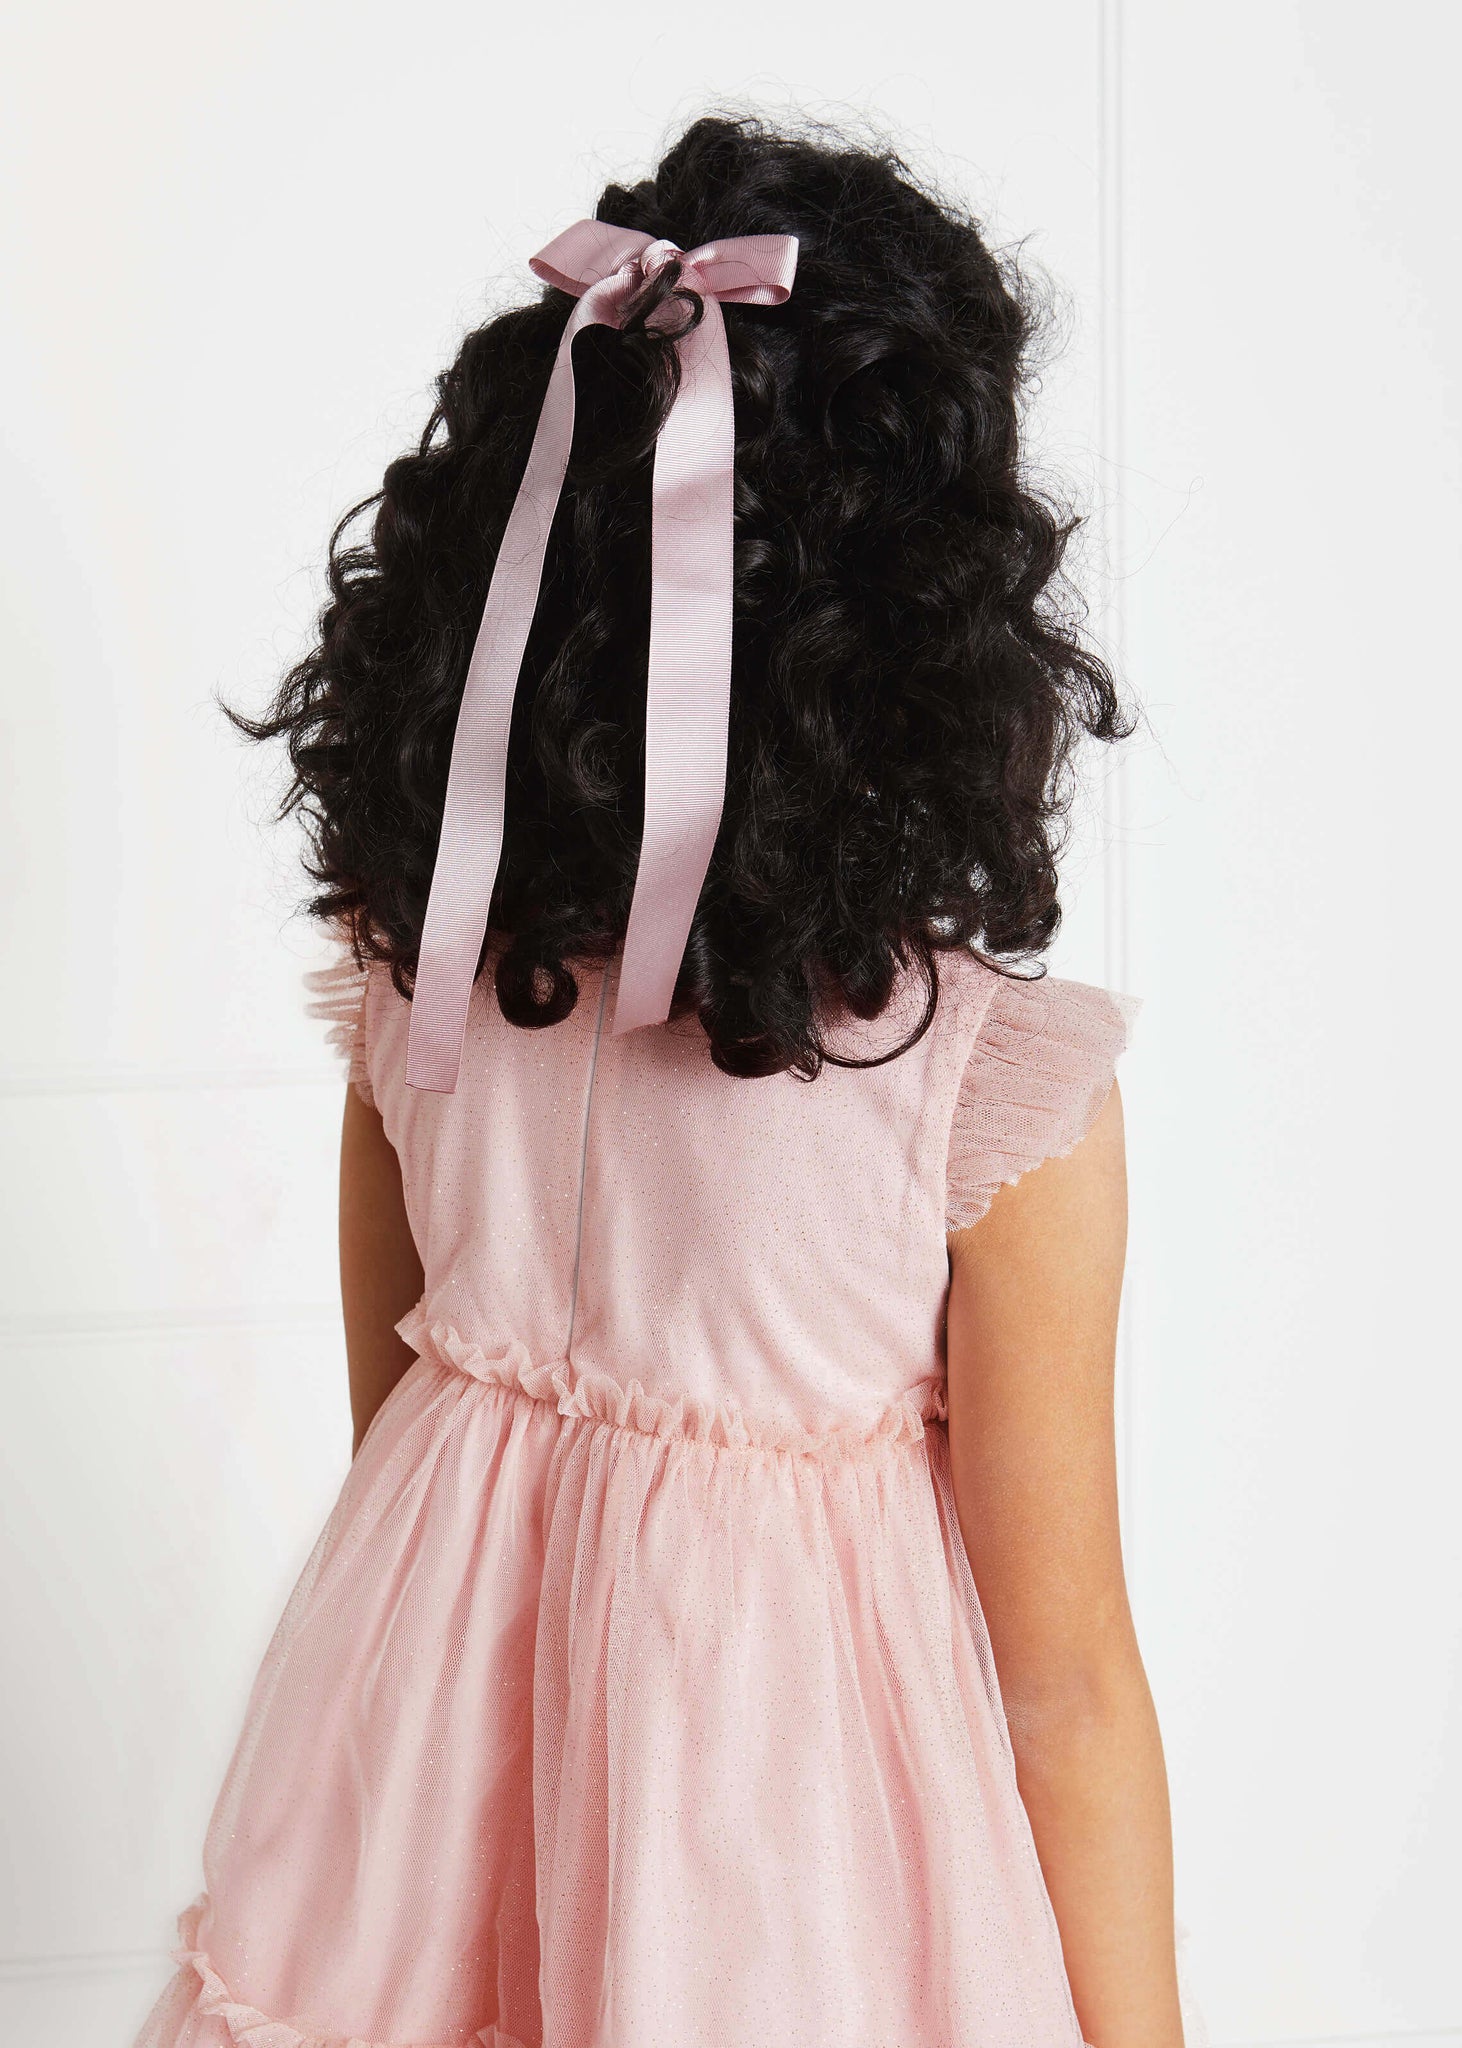 Tiered Tulle Overlay Dress With Ruffle Detail in Pink (2-10yrs) Dresses  from Pepa London